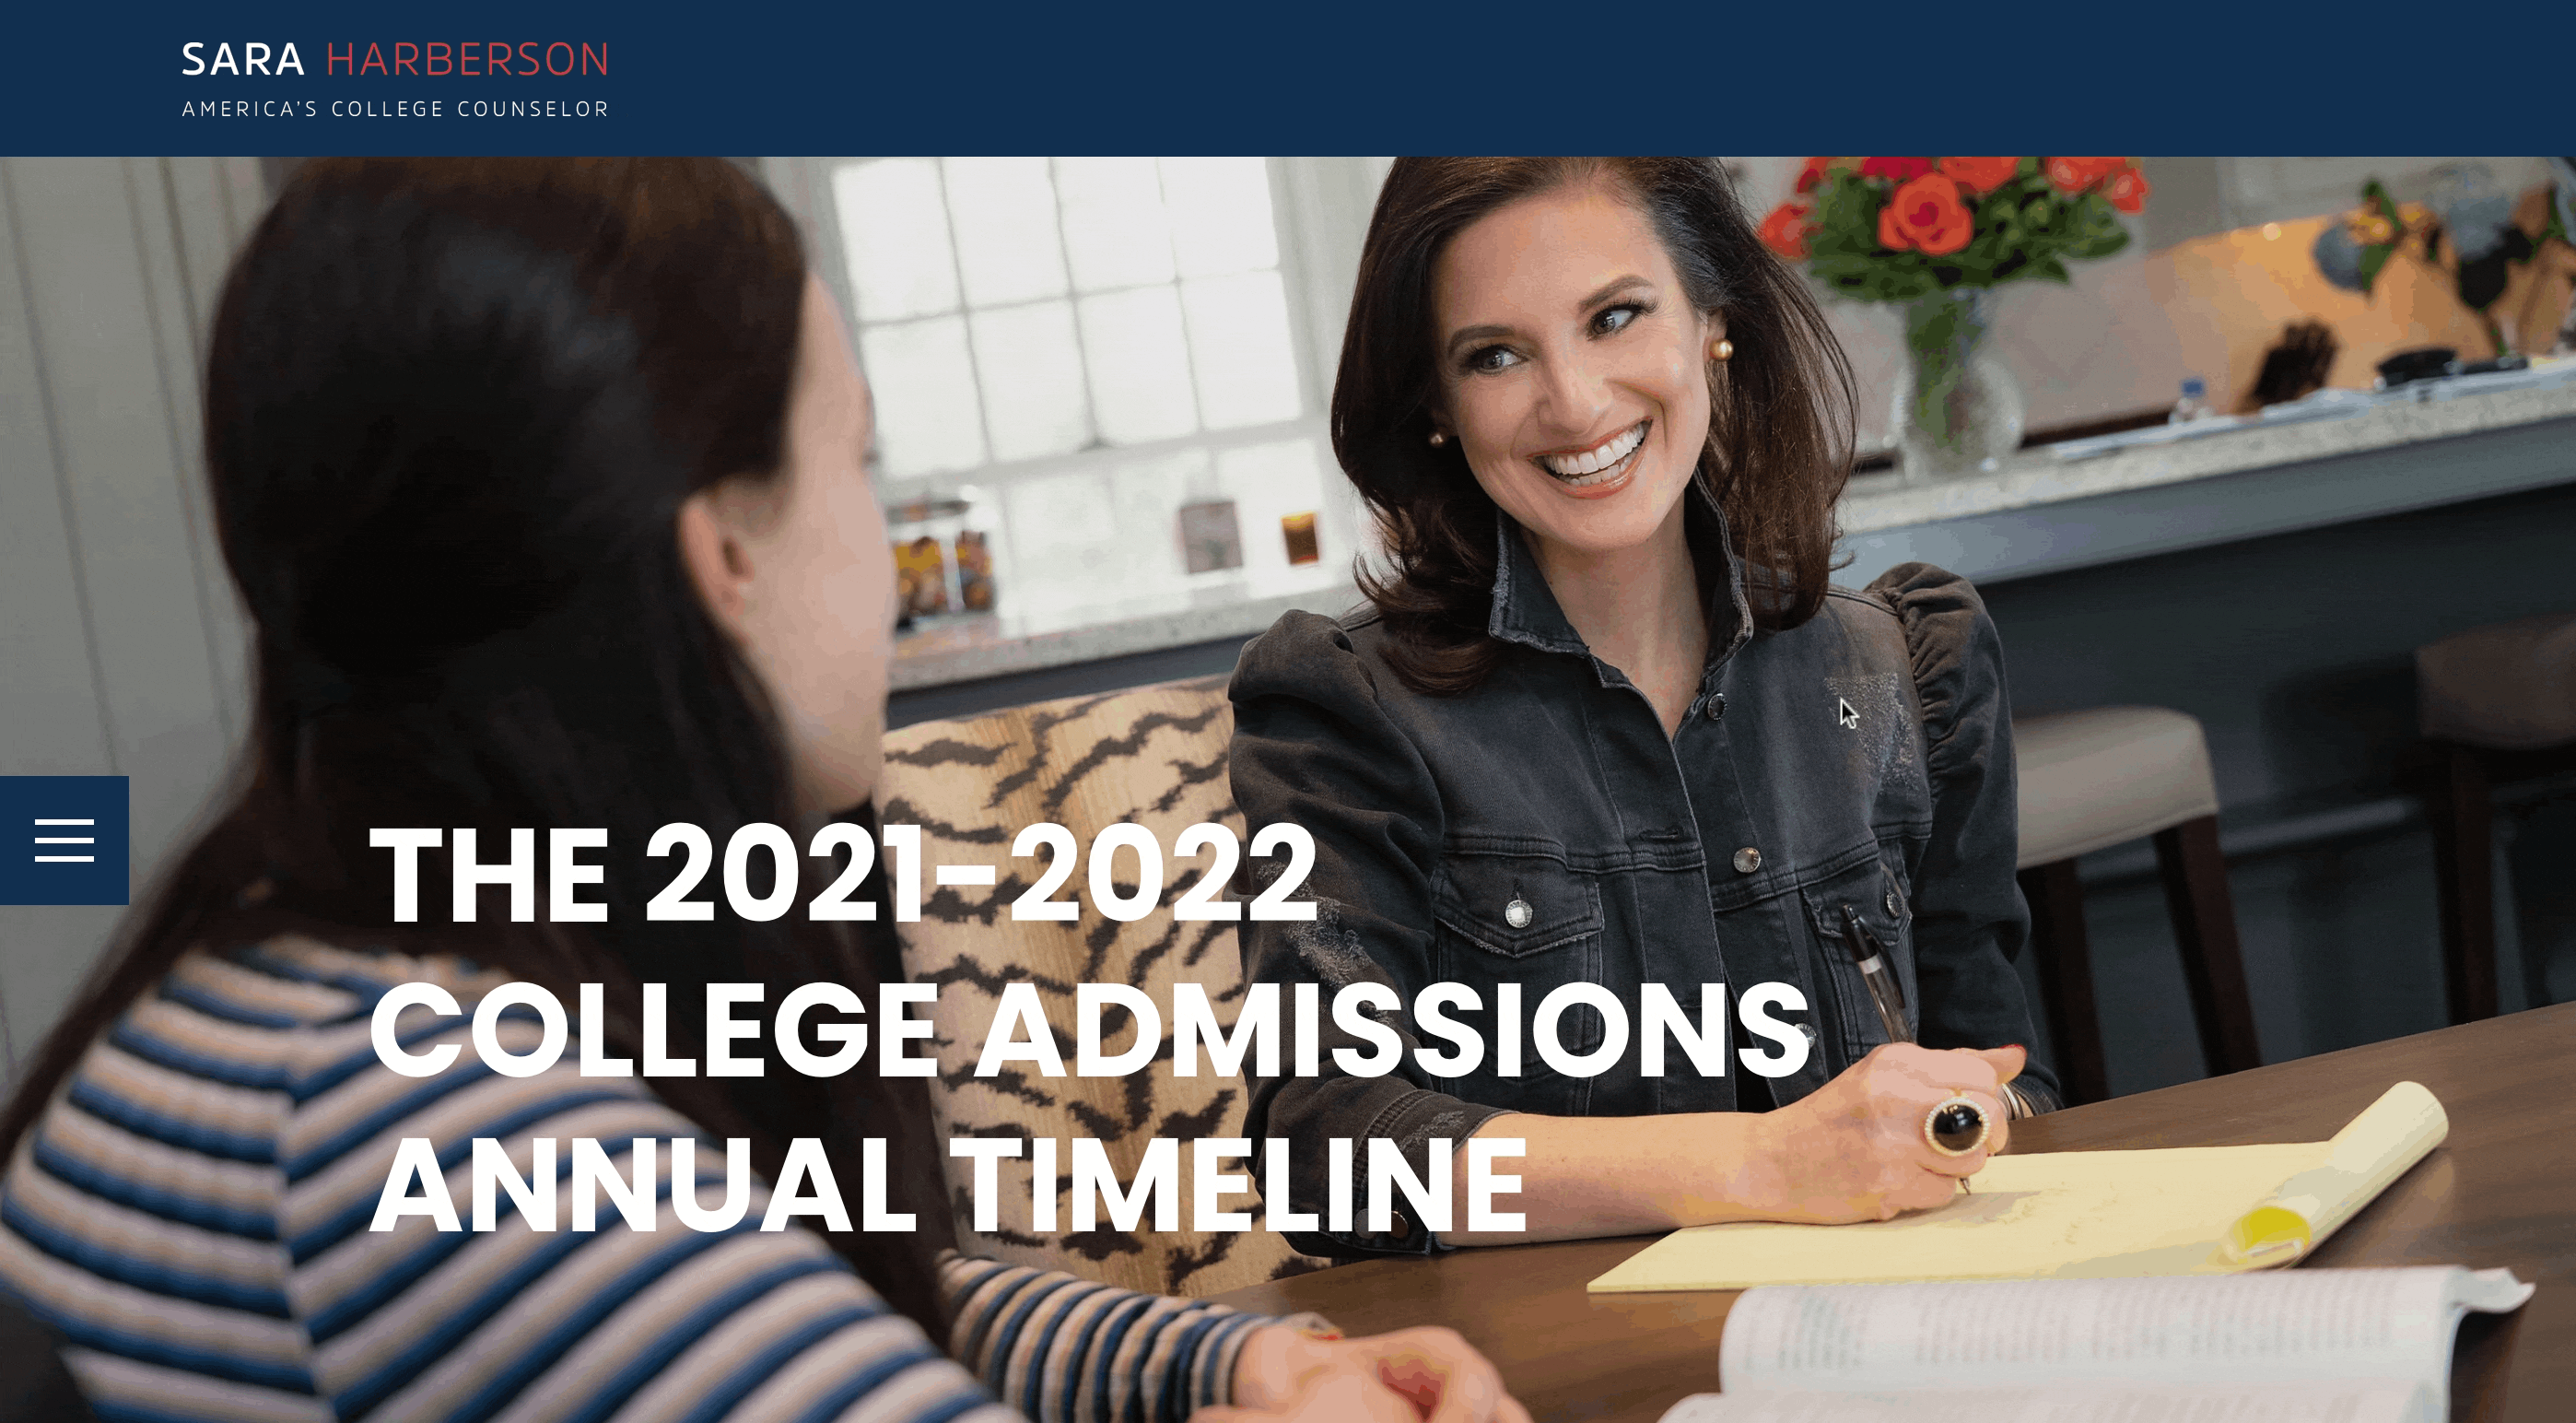 College Admissions Annual Timeline 2021-2022